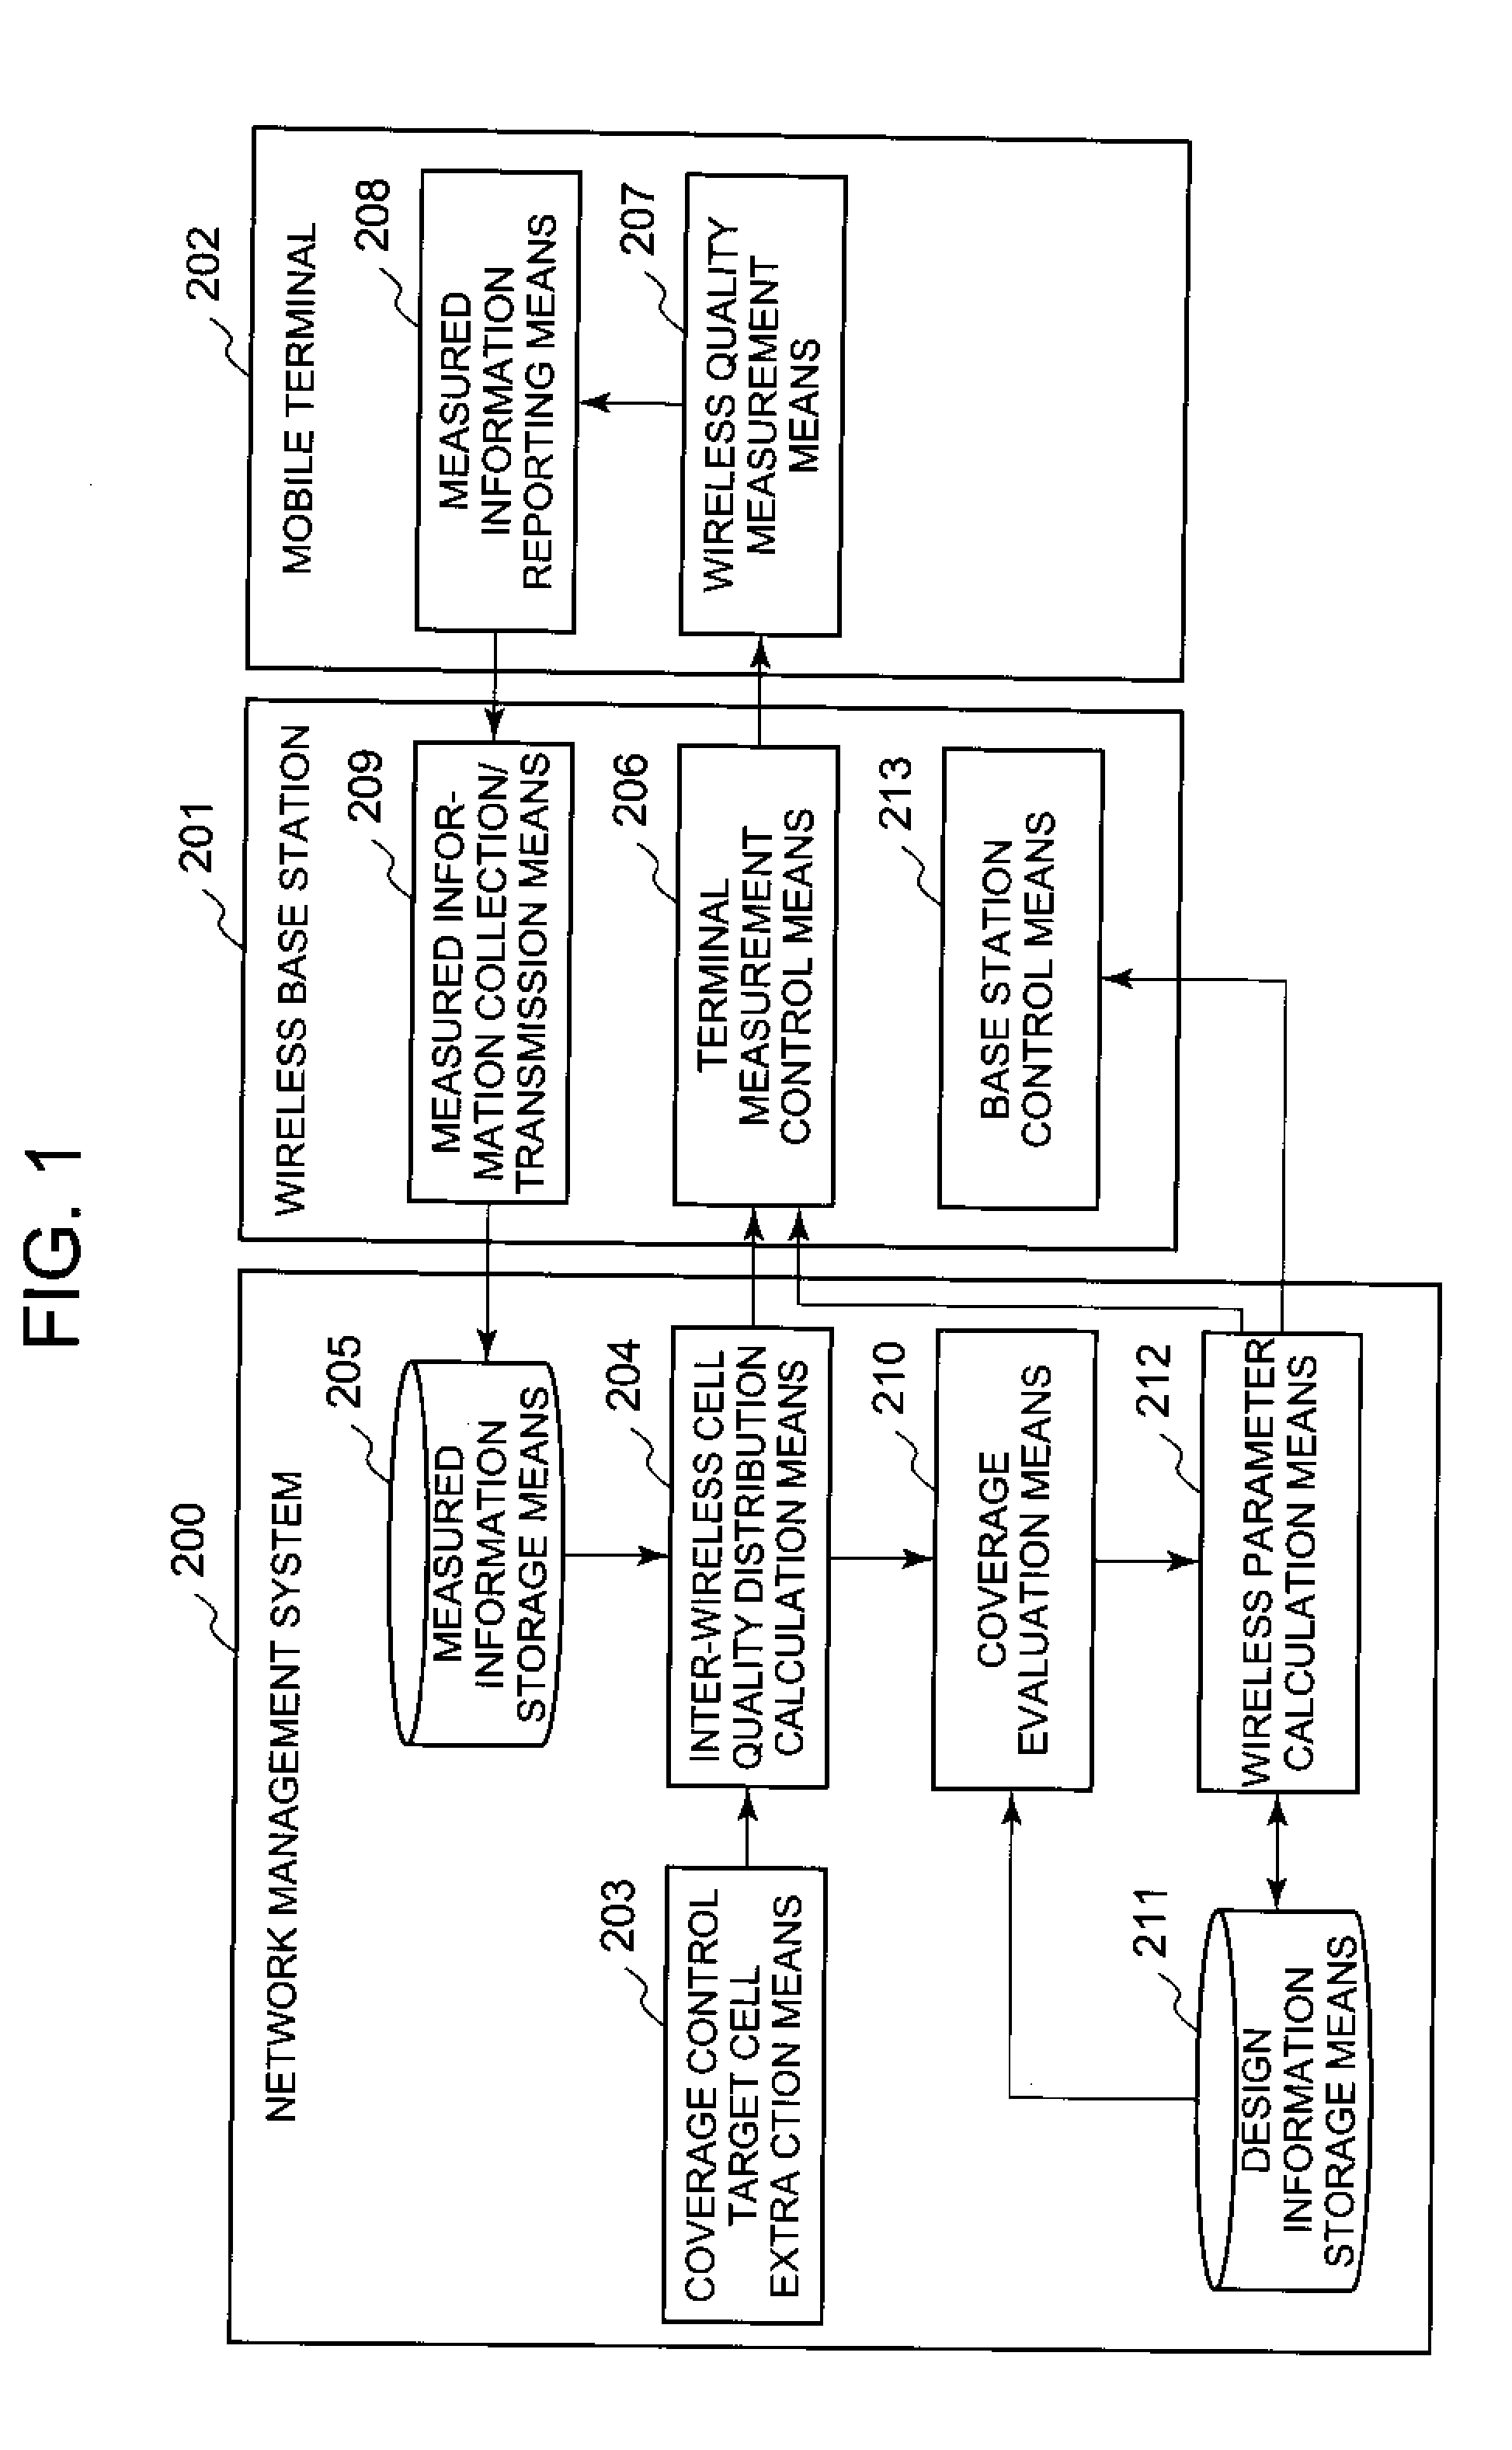 Network management system, wireless coverage control method and wireless coverage control program